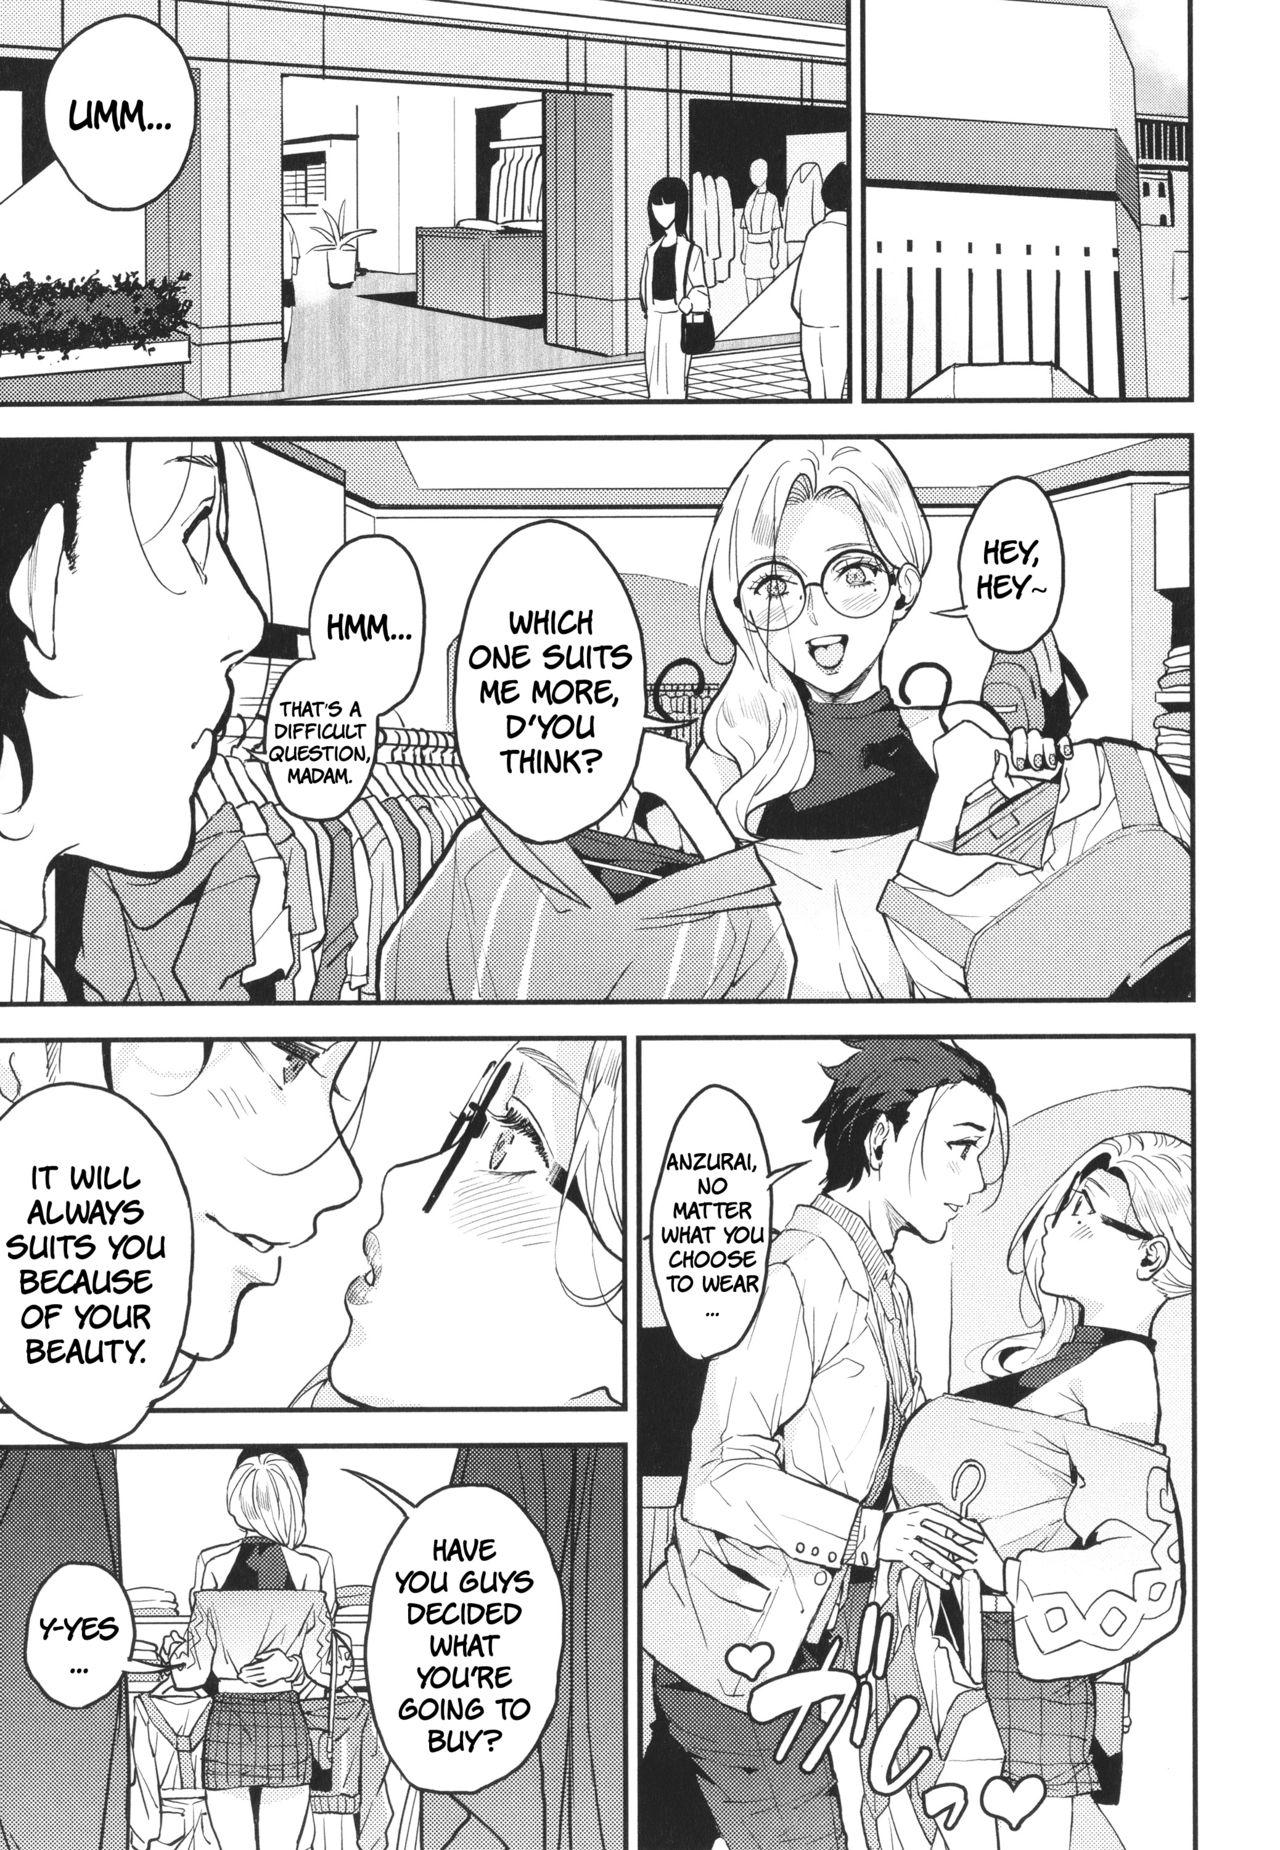 1080p Hitozuma Shimai to Issho ni | A Date With The Married Sisters Black Cock - Page 5